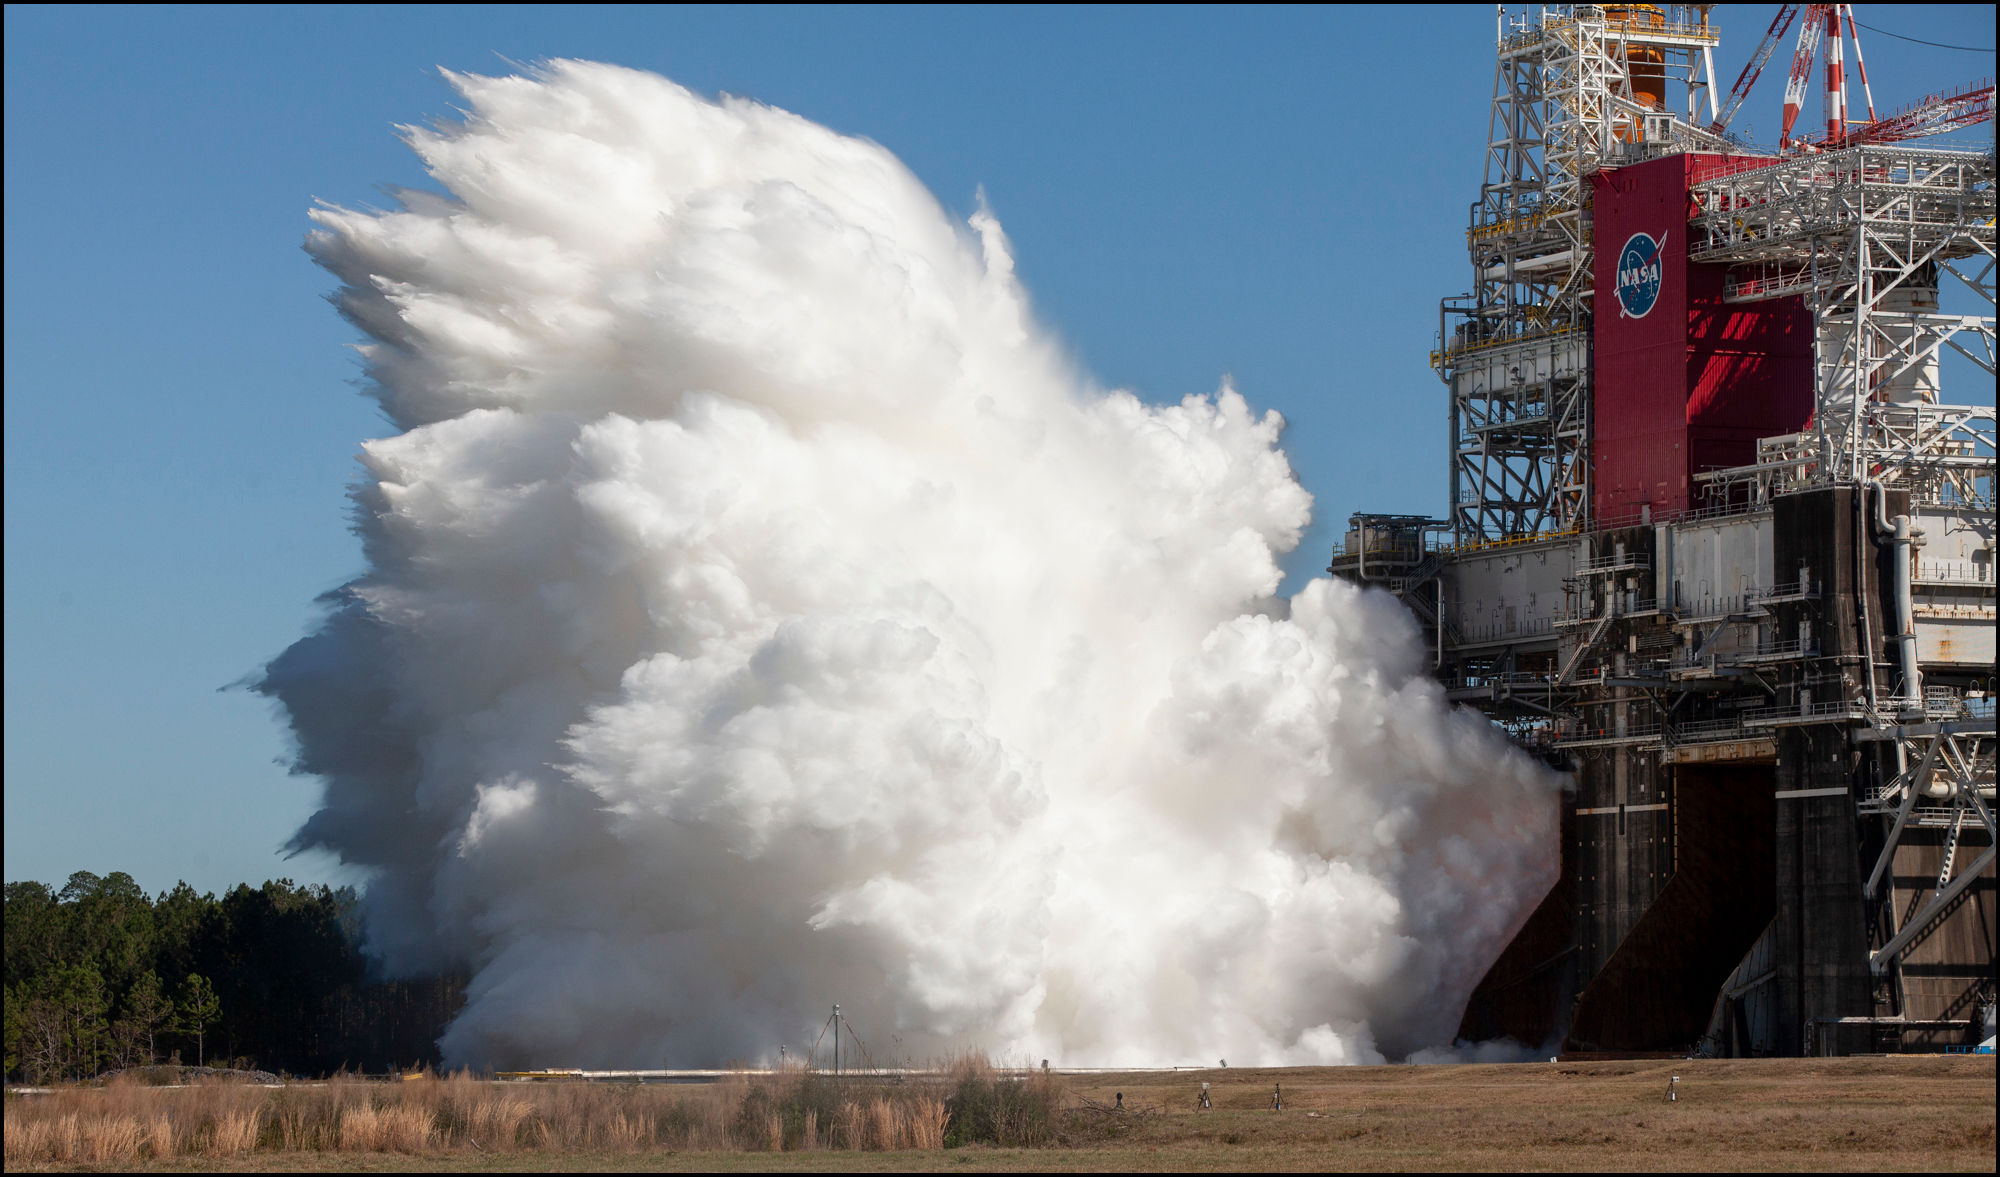 Successful test for NASA’s giant Moon rocket